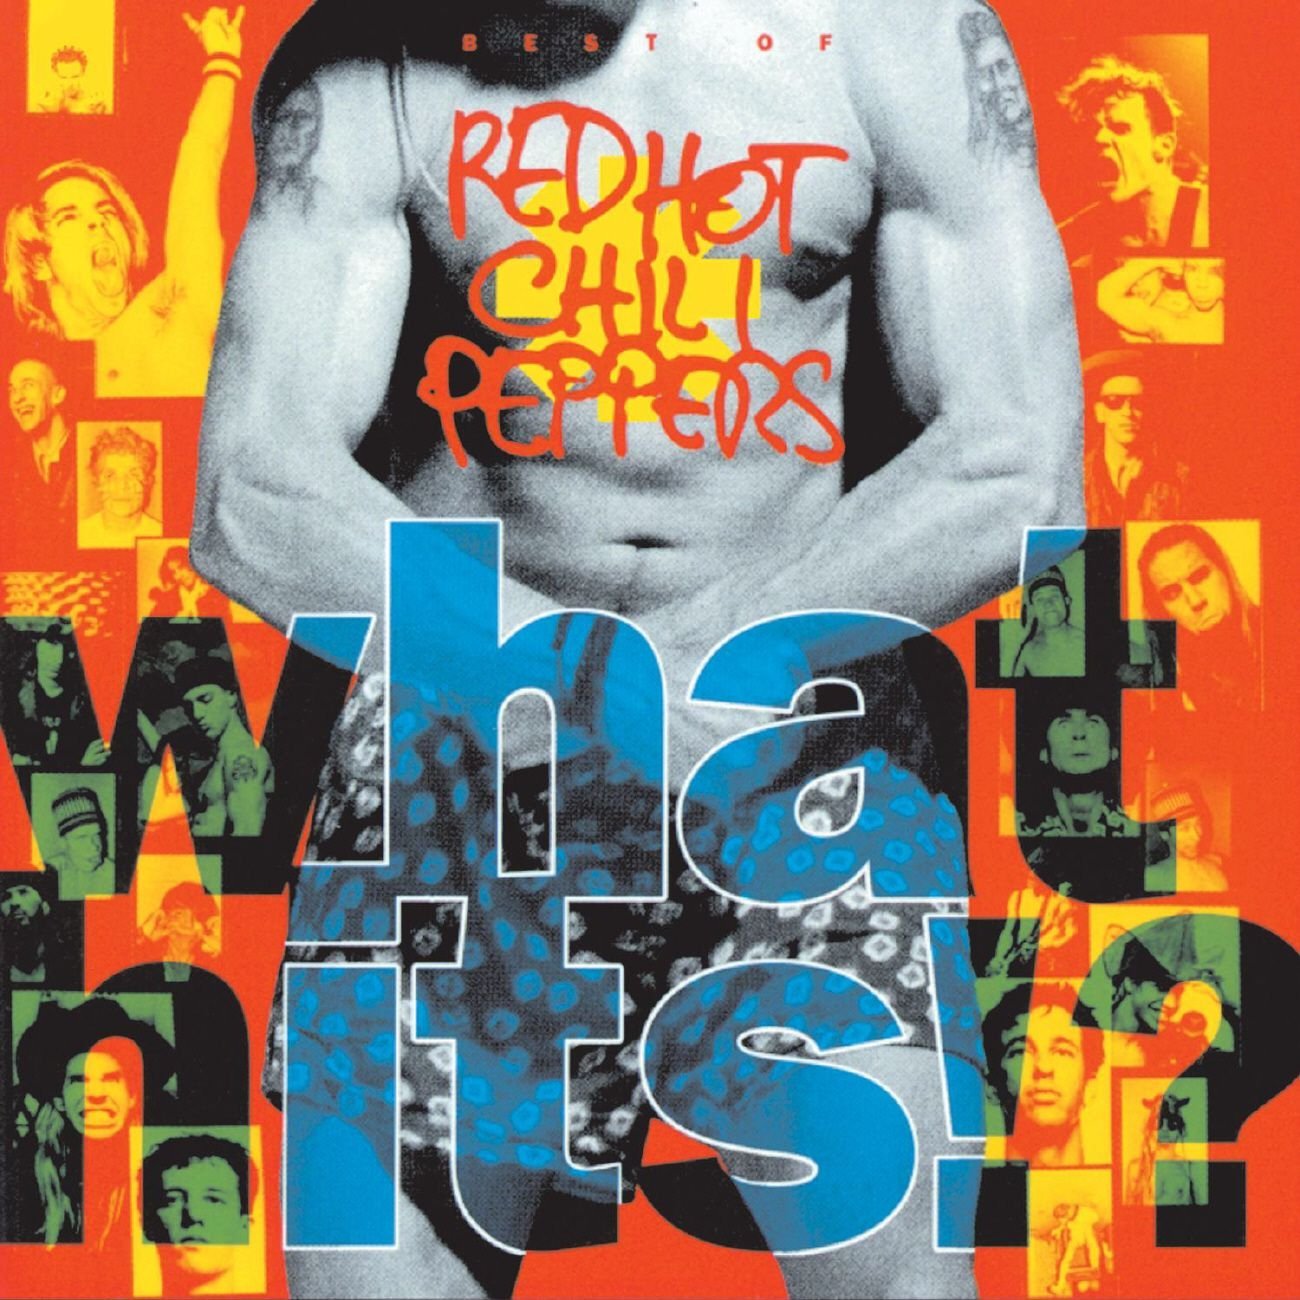 RED HOT CHILI PEPPERS What Hits!? reviews